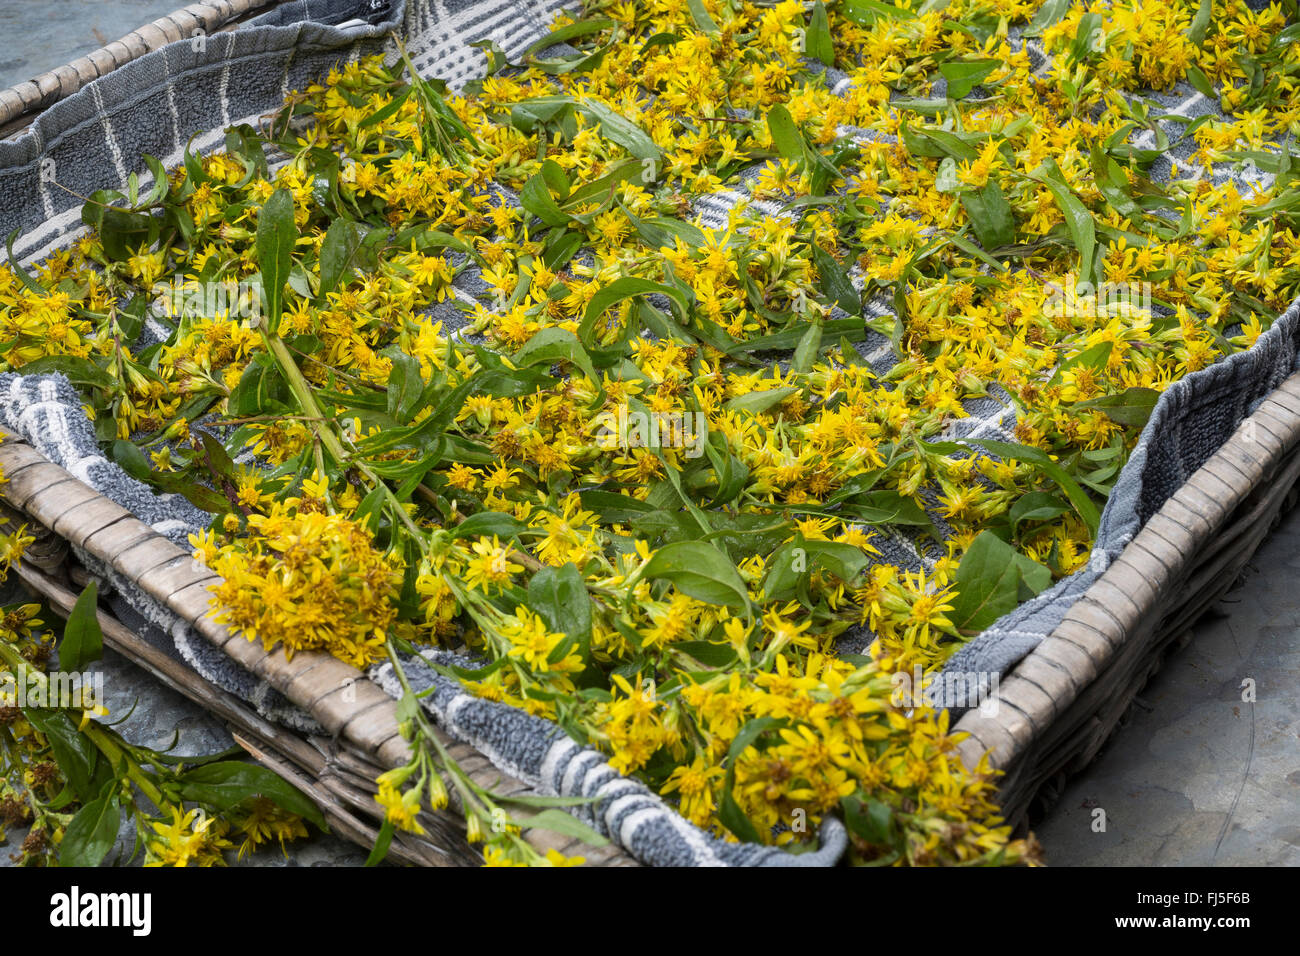 goldenrod, golden rod (Solidago virgaurea), collected flowers and leaves drying, Germany Stock Photo